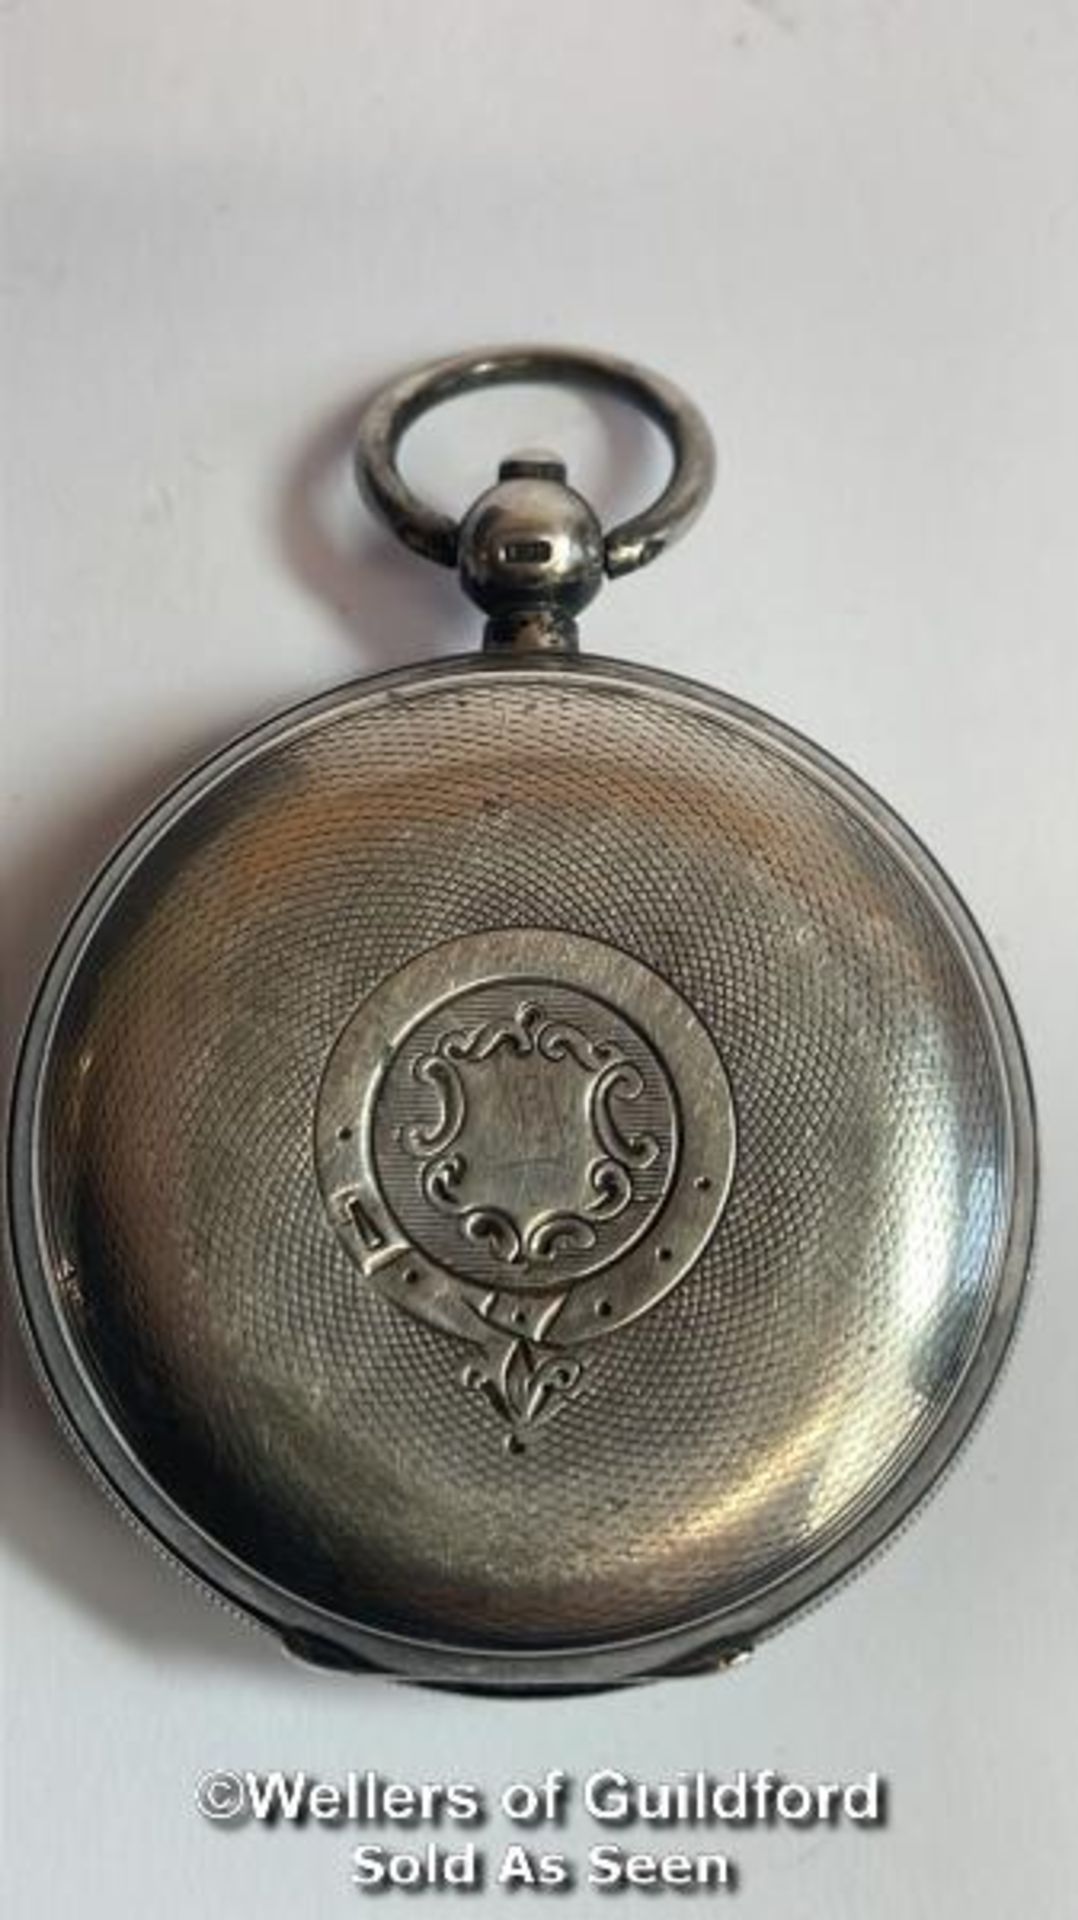 Hallmarked silver cased pocket watch "The Franklin" by John Myers & Co. Westminster Bridge Rd no. - Image 3 of 8